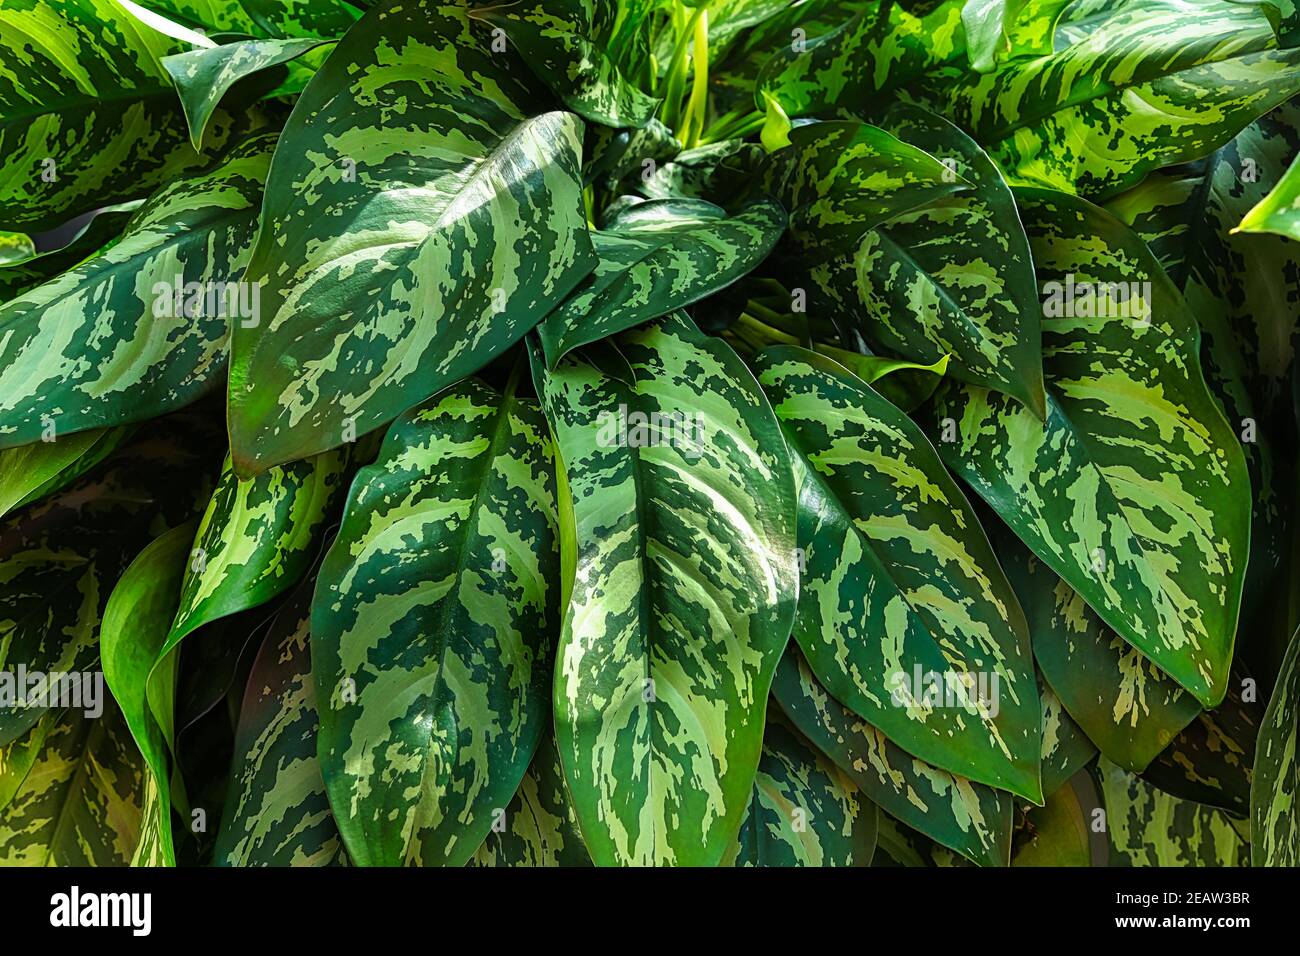 A cluster of aglaonema leaves on a plant Stock Photo